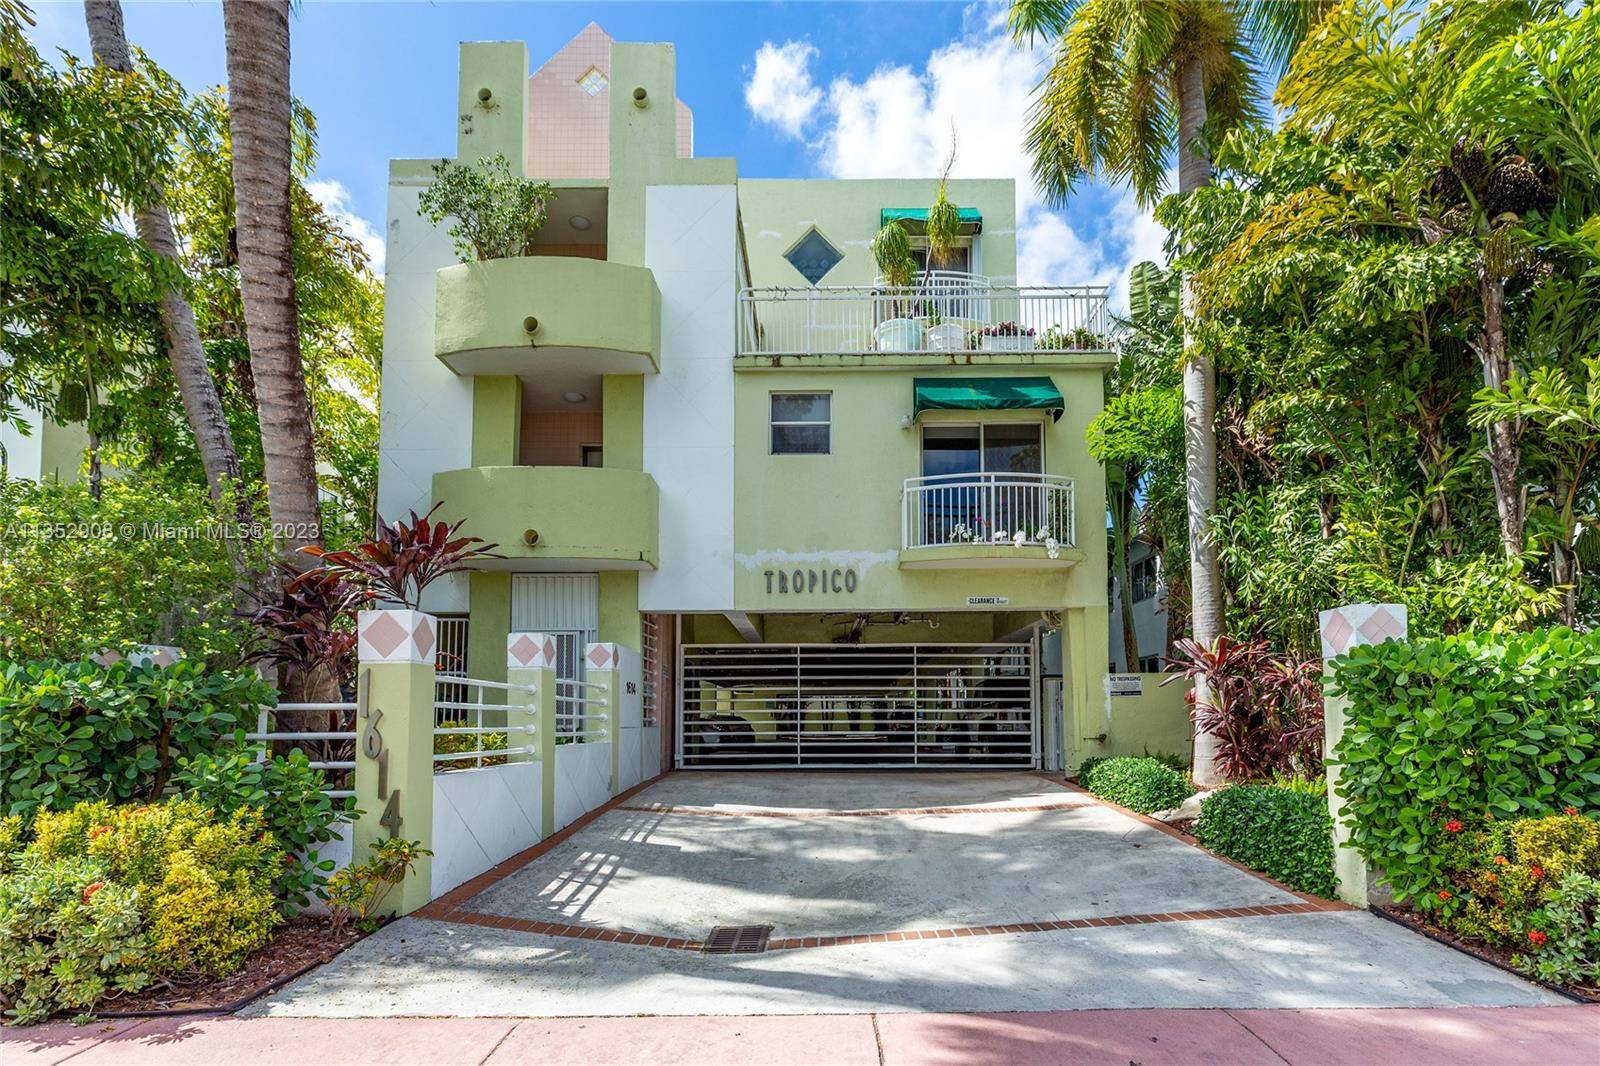 Excellent location a block away from Lincoln Road.